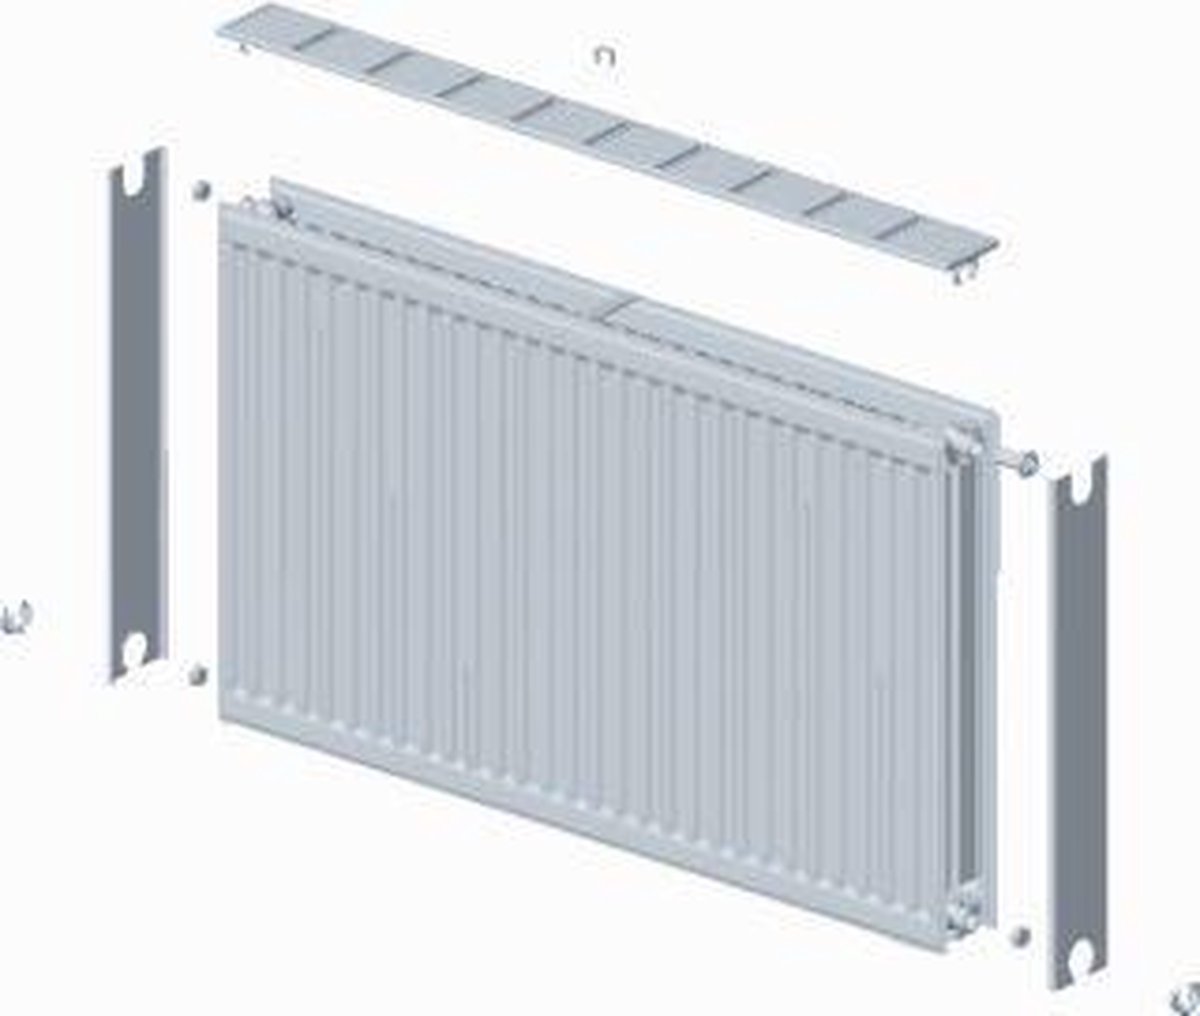 Stelrad paneelradiator Novello, staal, wit, (hxlxd) 400x600x100mm, 22